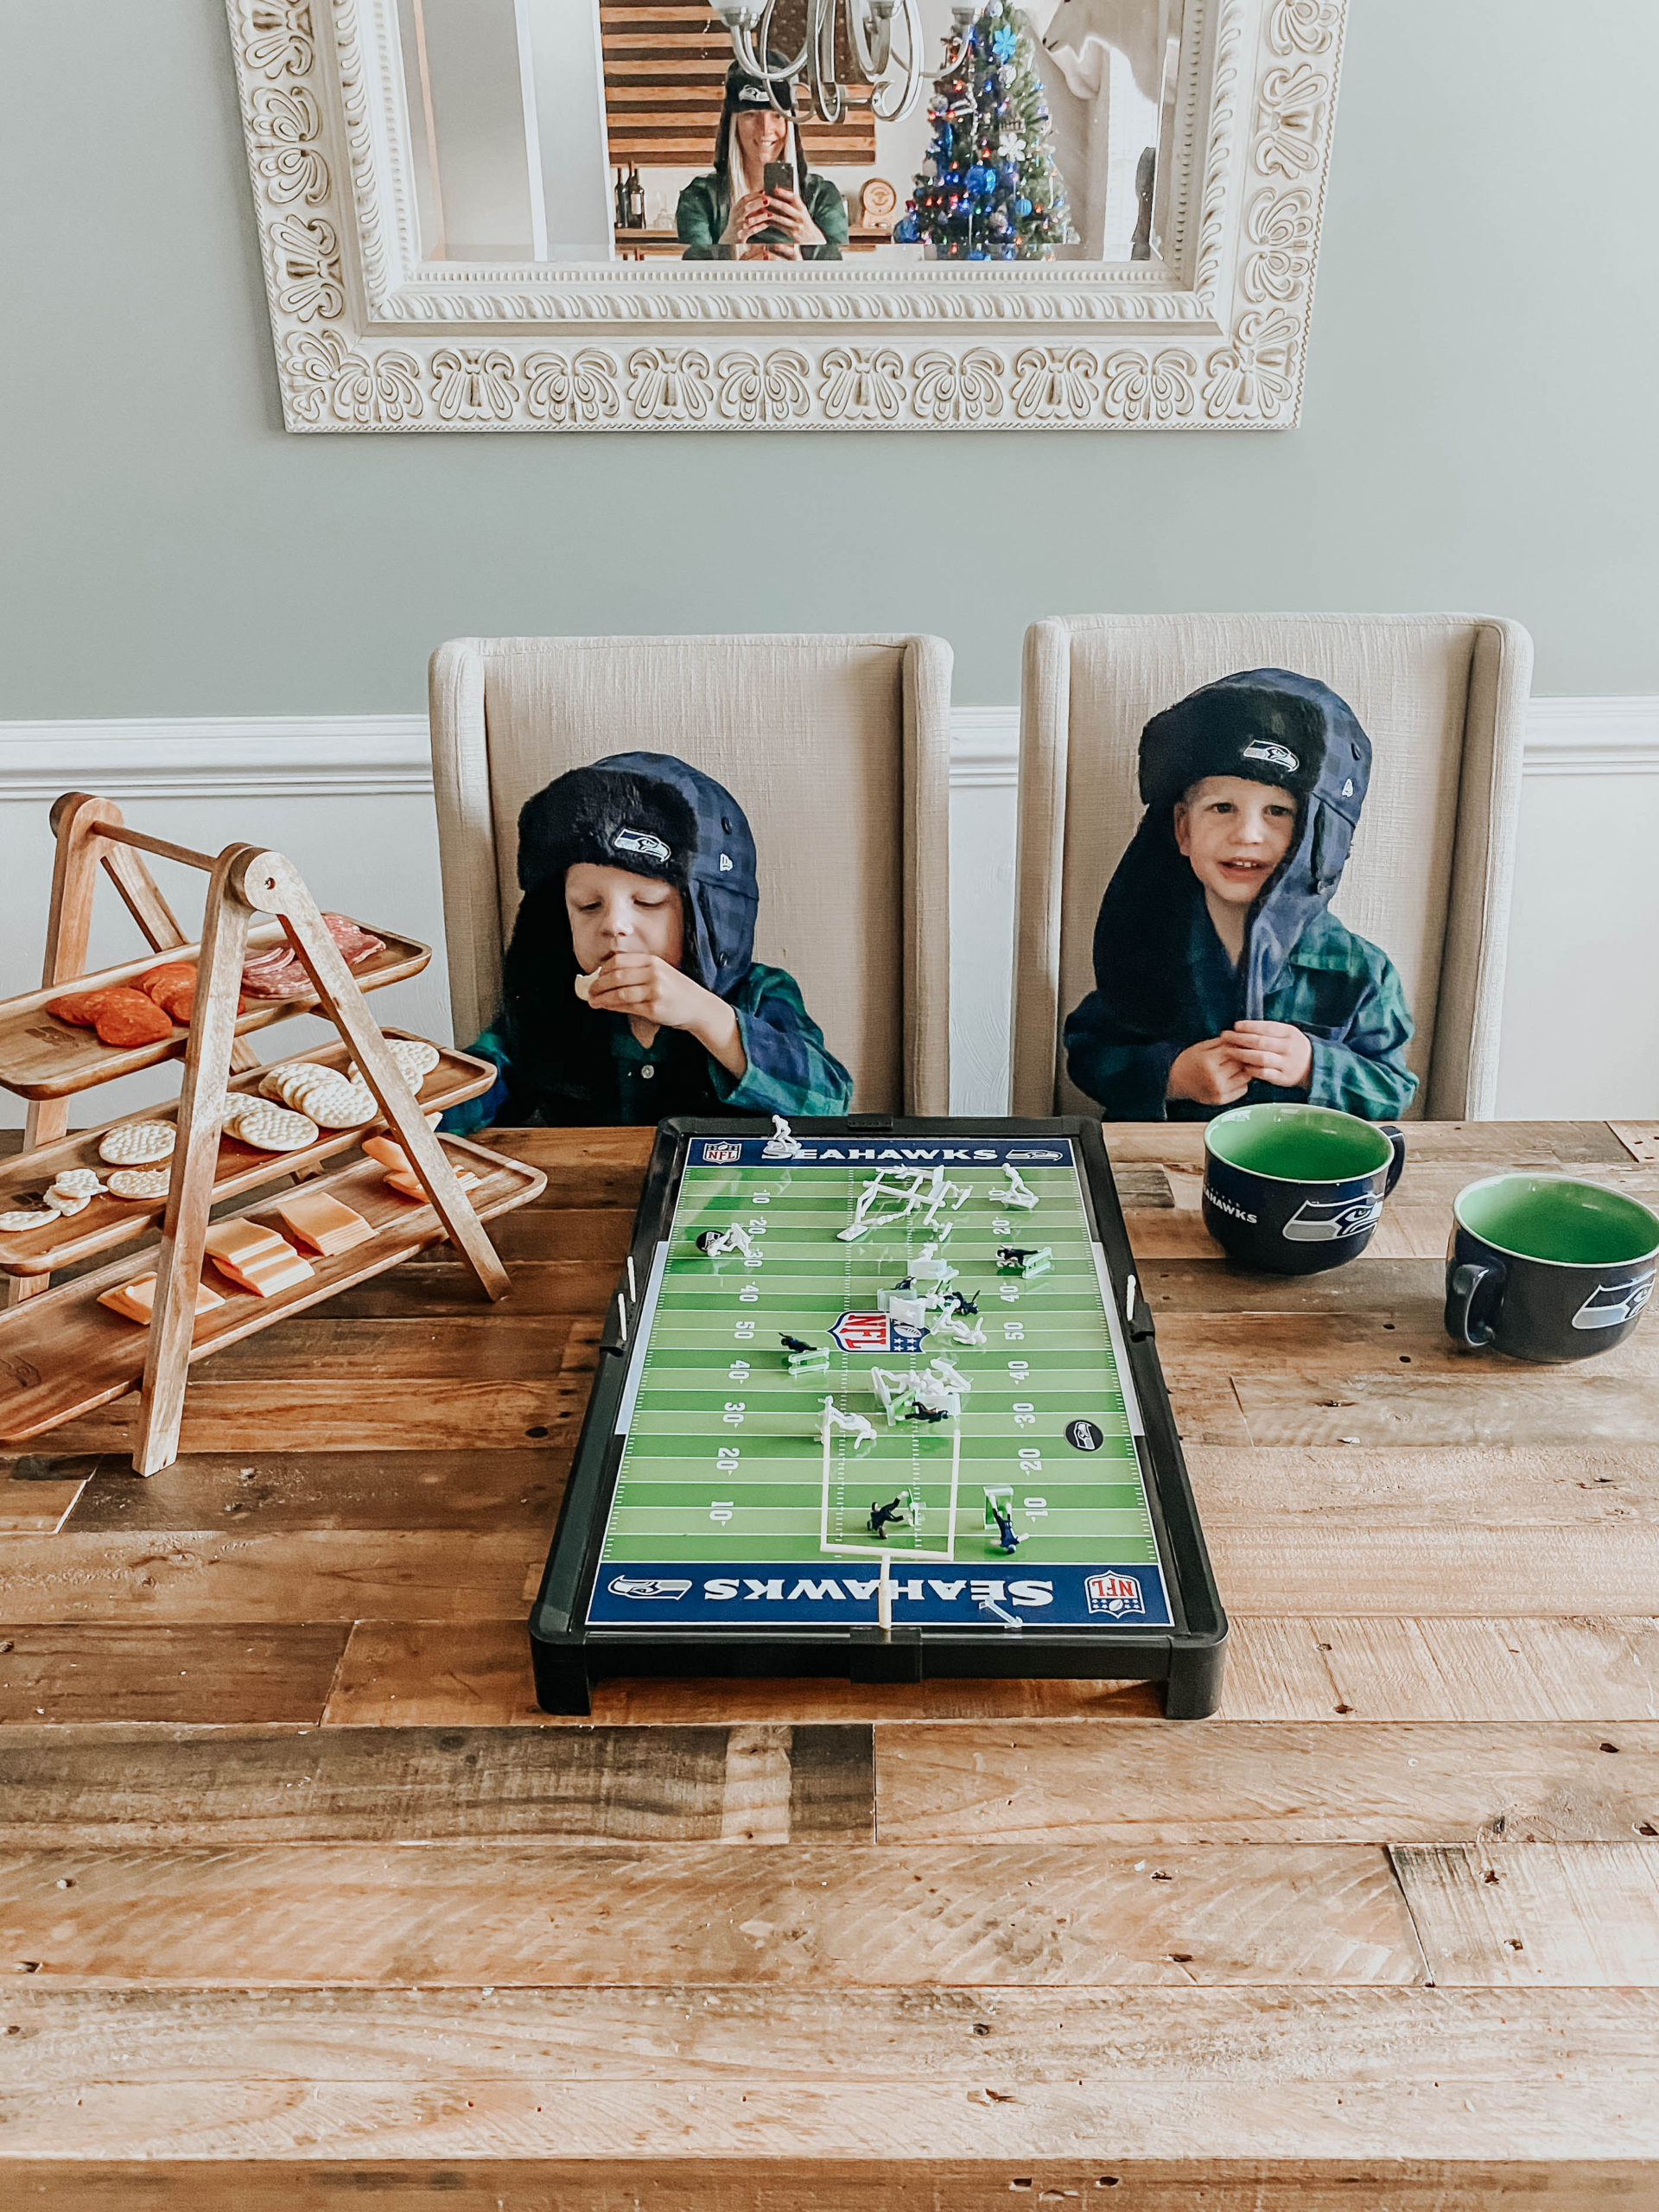 Homegating with the Official NFL Shop!